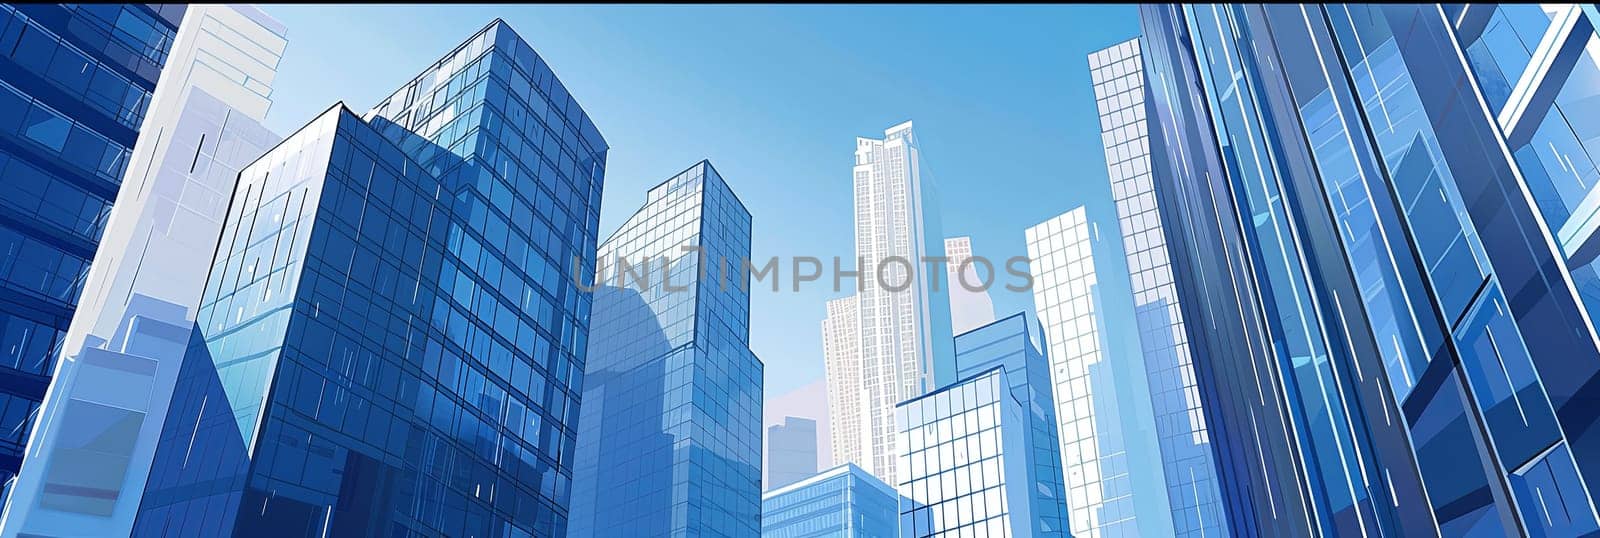 A group of towering skyscrapers lined up in the urban financial district of a city, reflecting modern architecture and urban development.